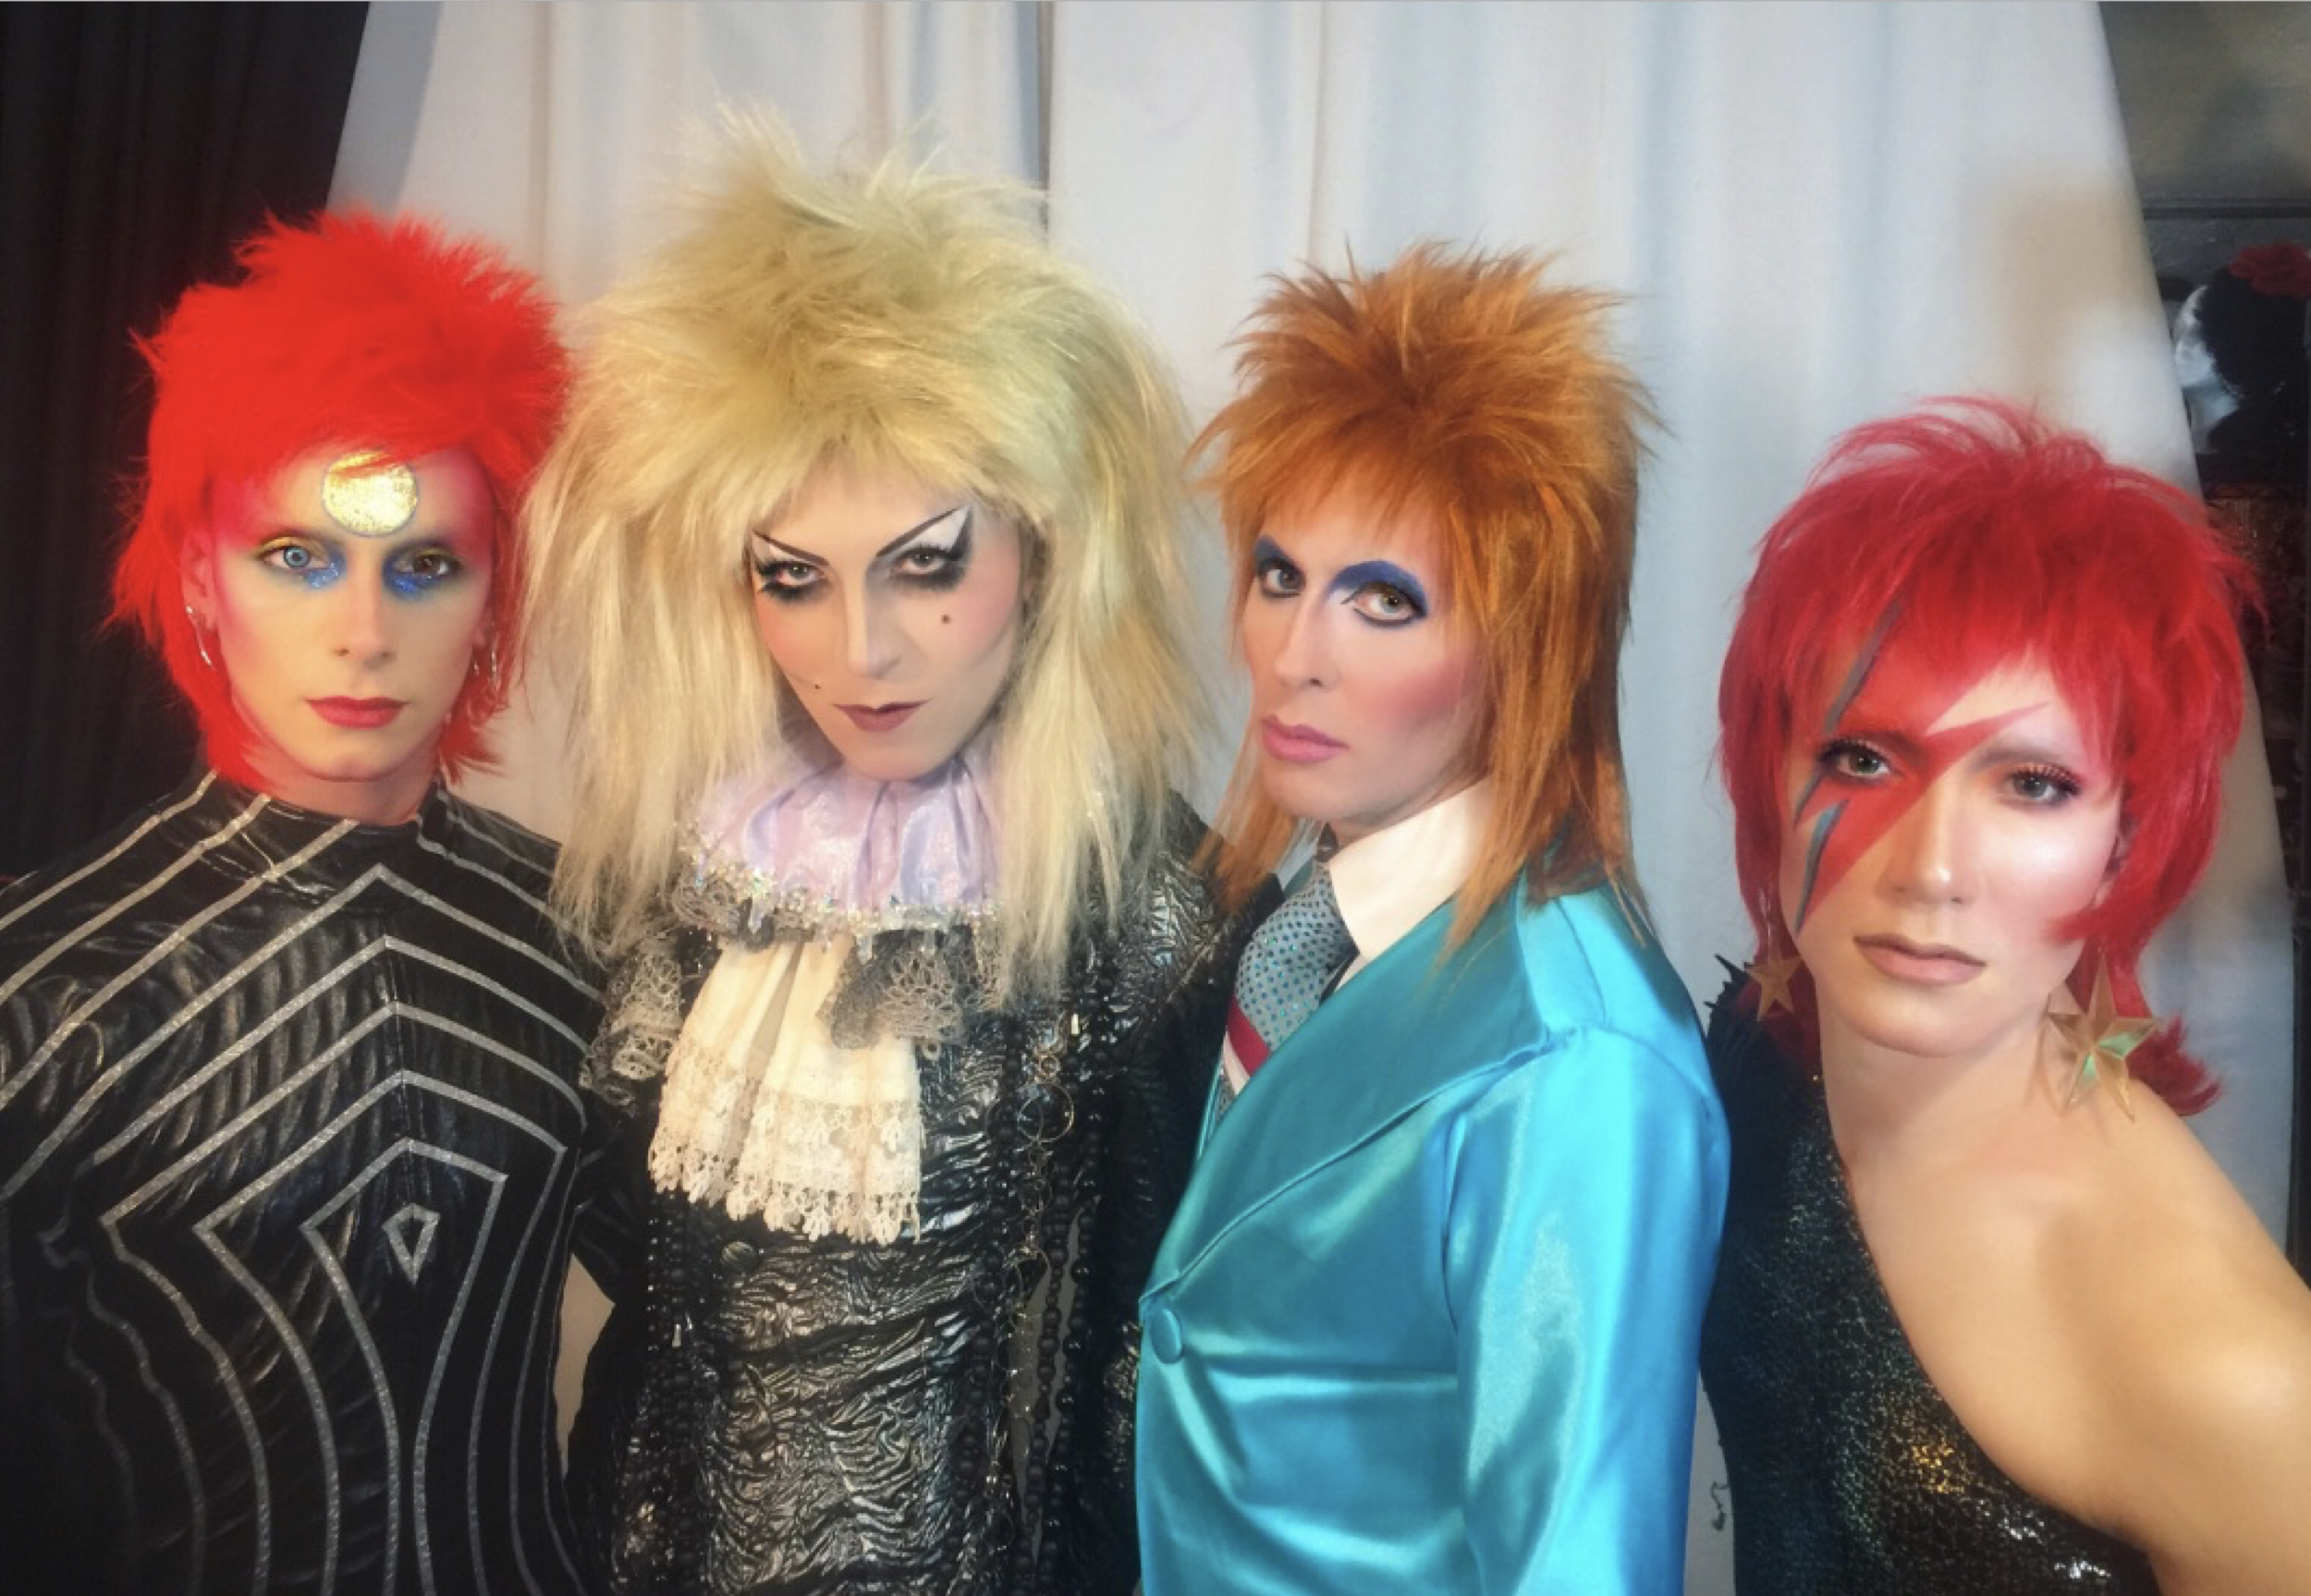 David Bowie Lookalikes Appear at East Village Hidden Hotspot. There is  Life on Mars said Bowie, - Exquisitely costumed performers for parties and  events. Screaming Queens - Exquisitely costumed performers for parties